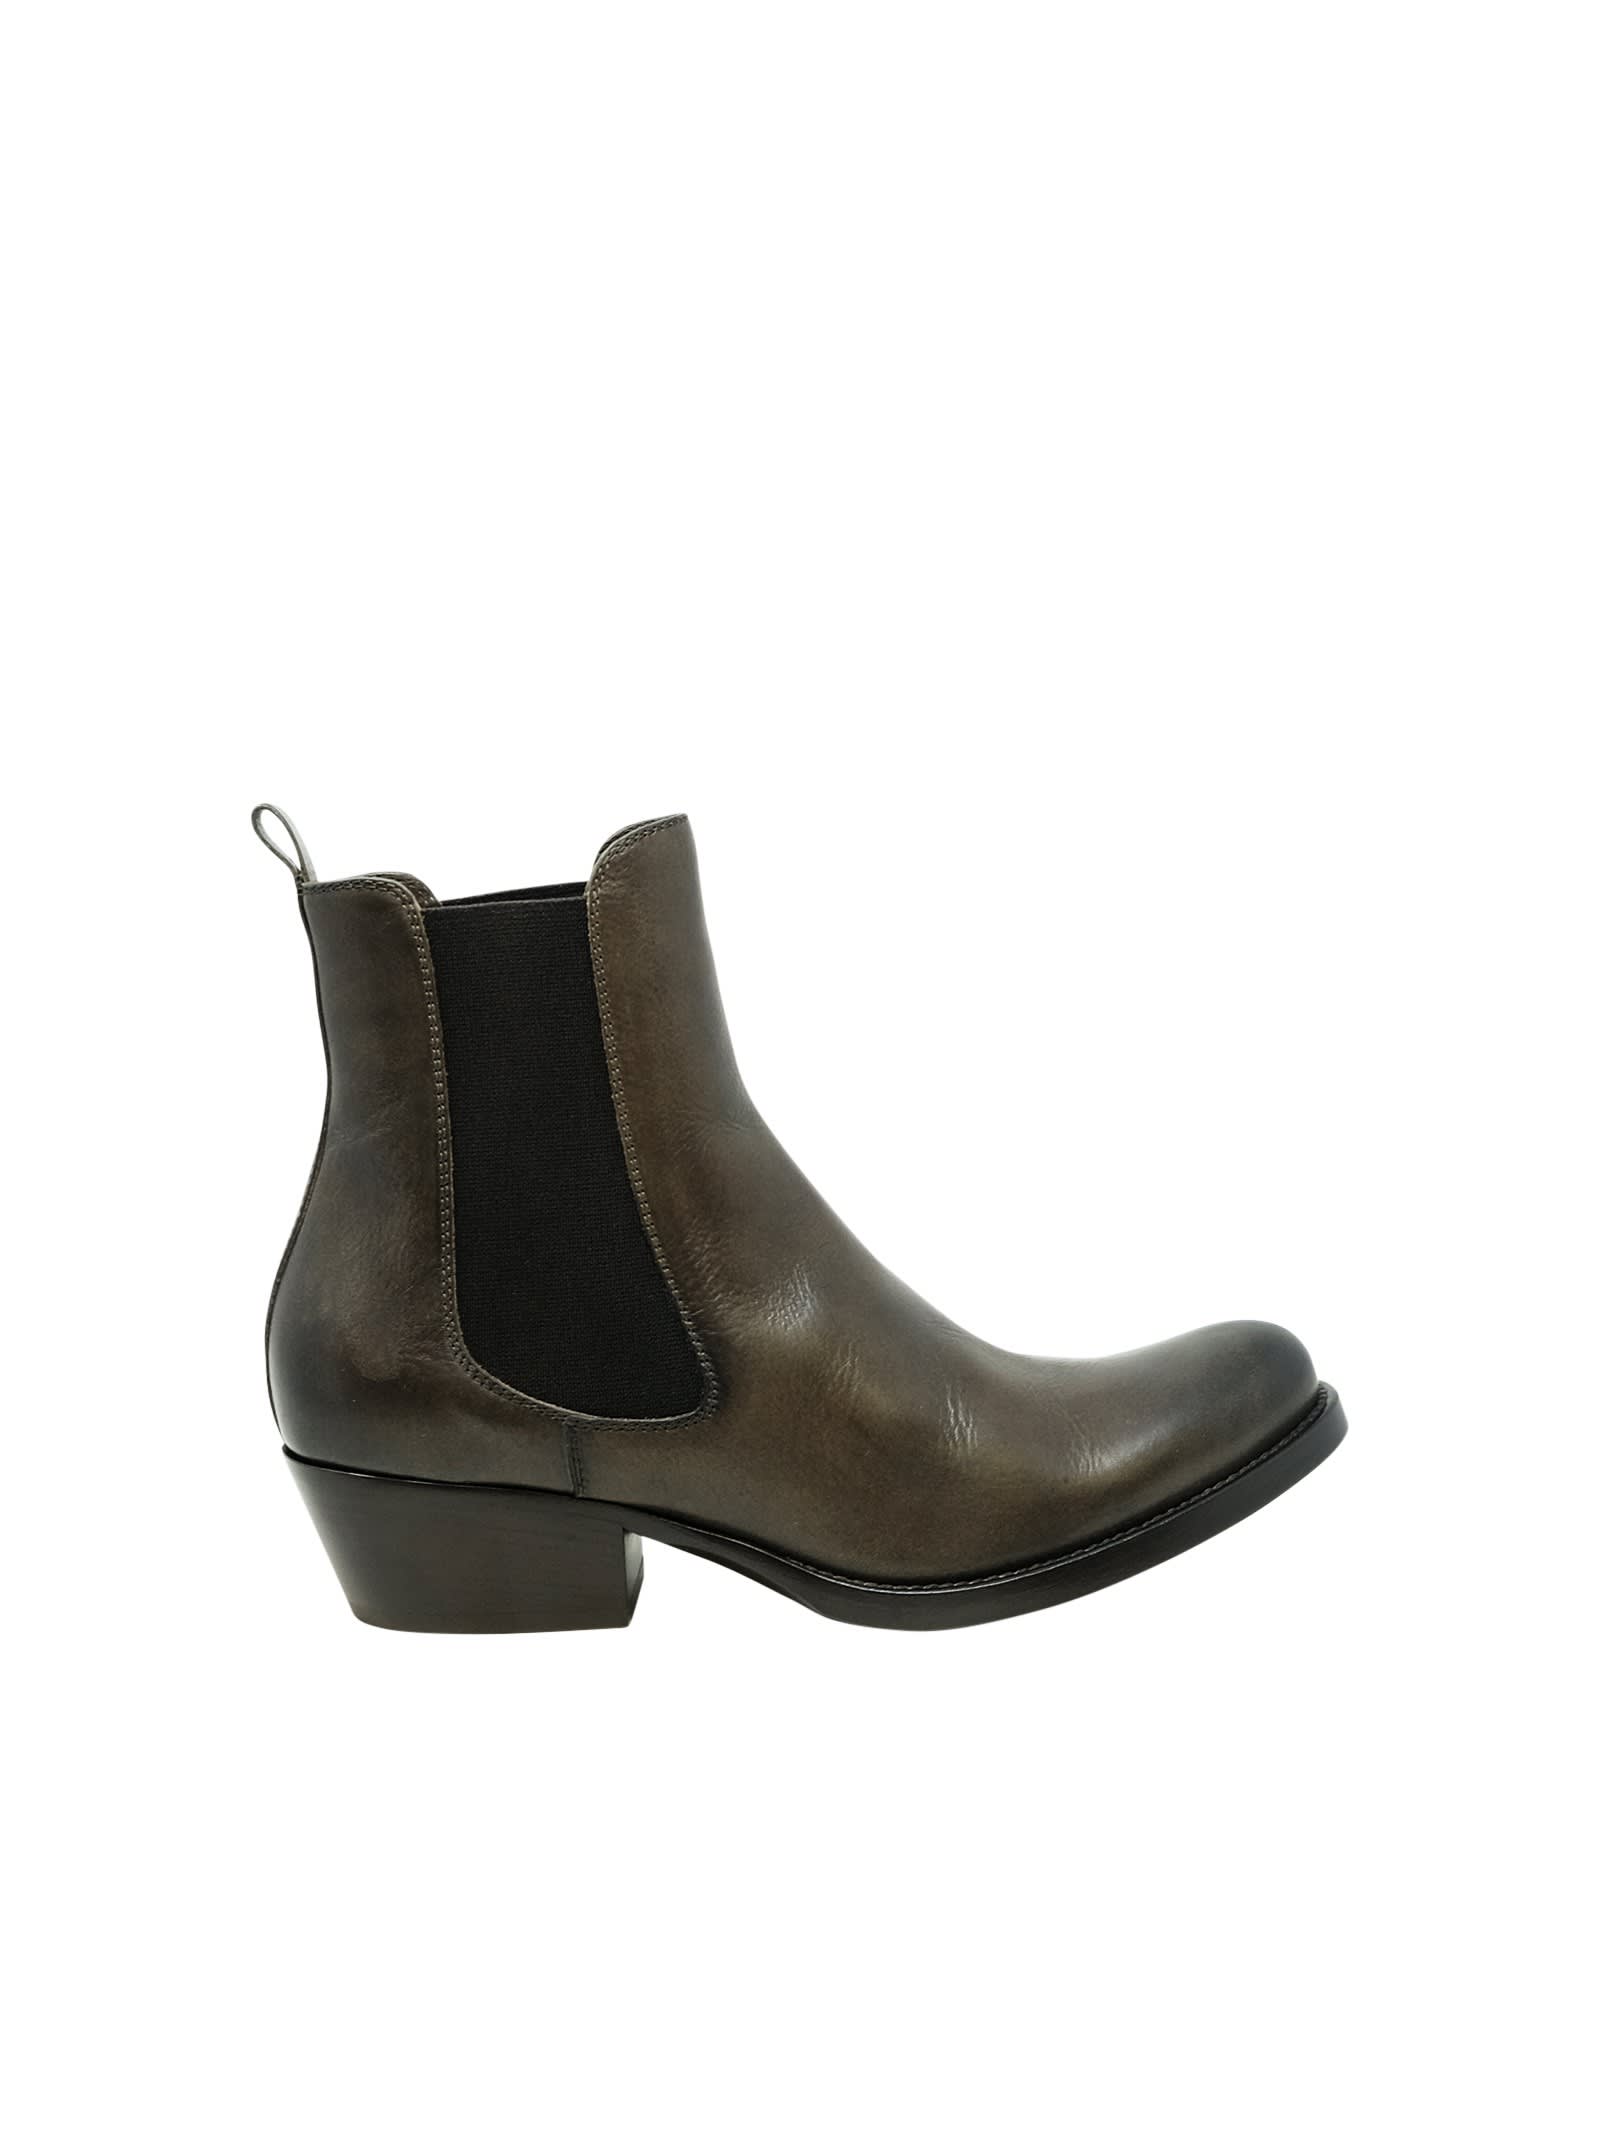 Sartore Sr421004 Torba Brown Leather Ankle Boots